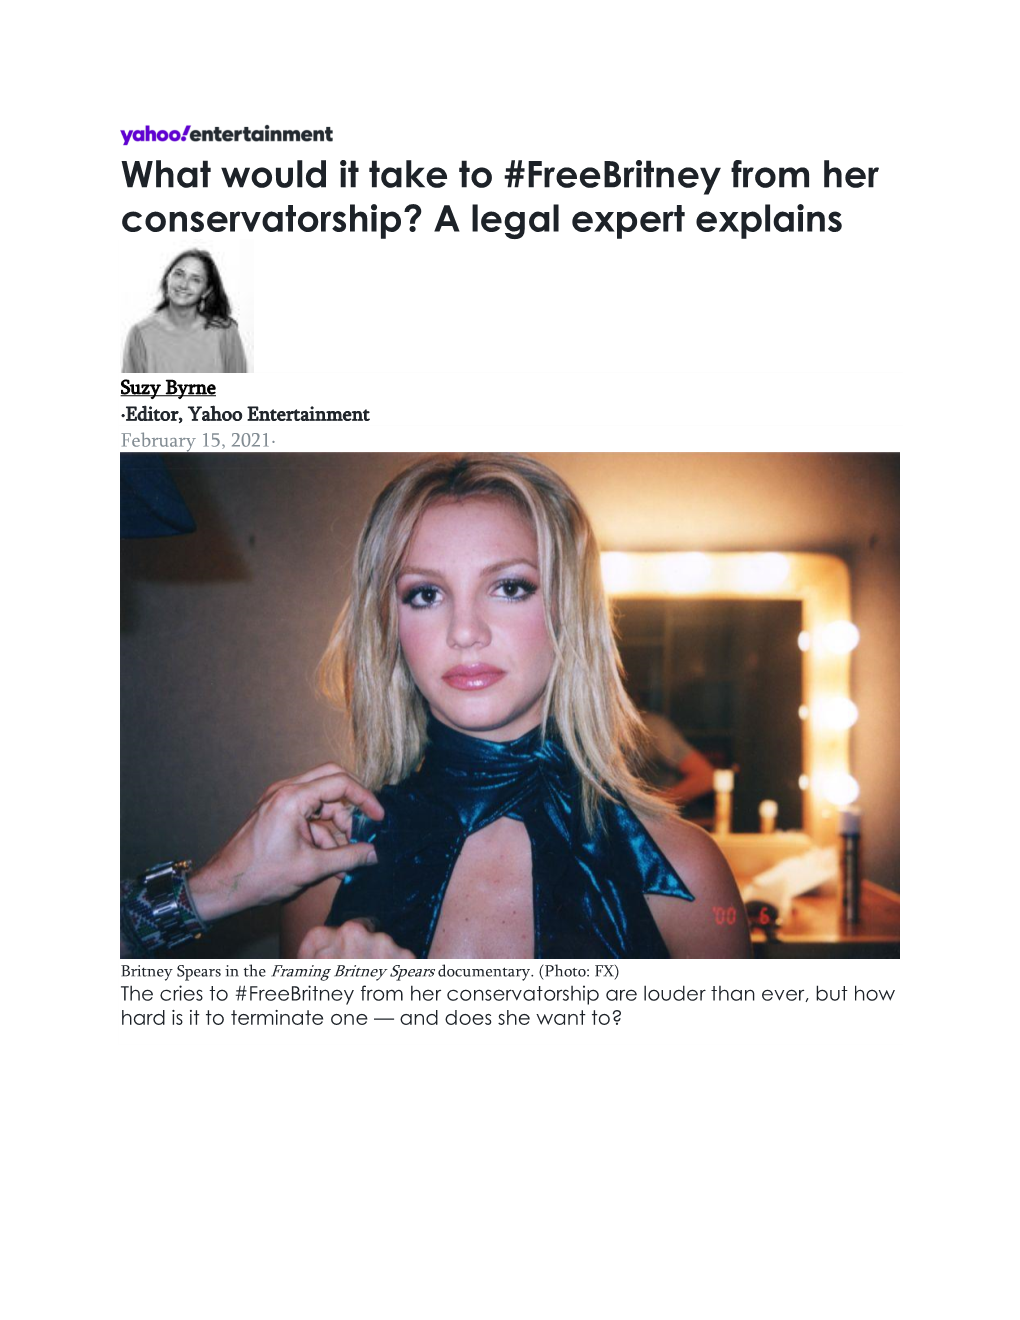 How Can Britney Spears Break Free from Conservatorship?